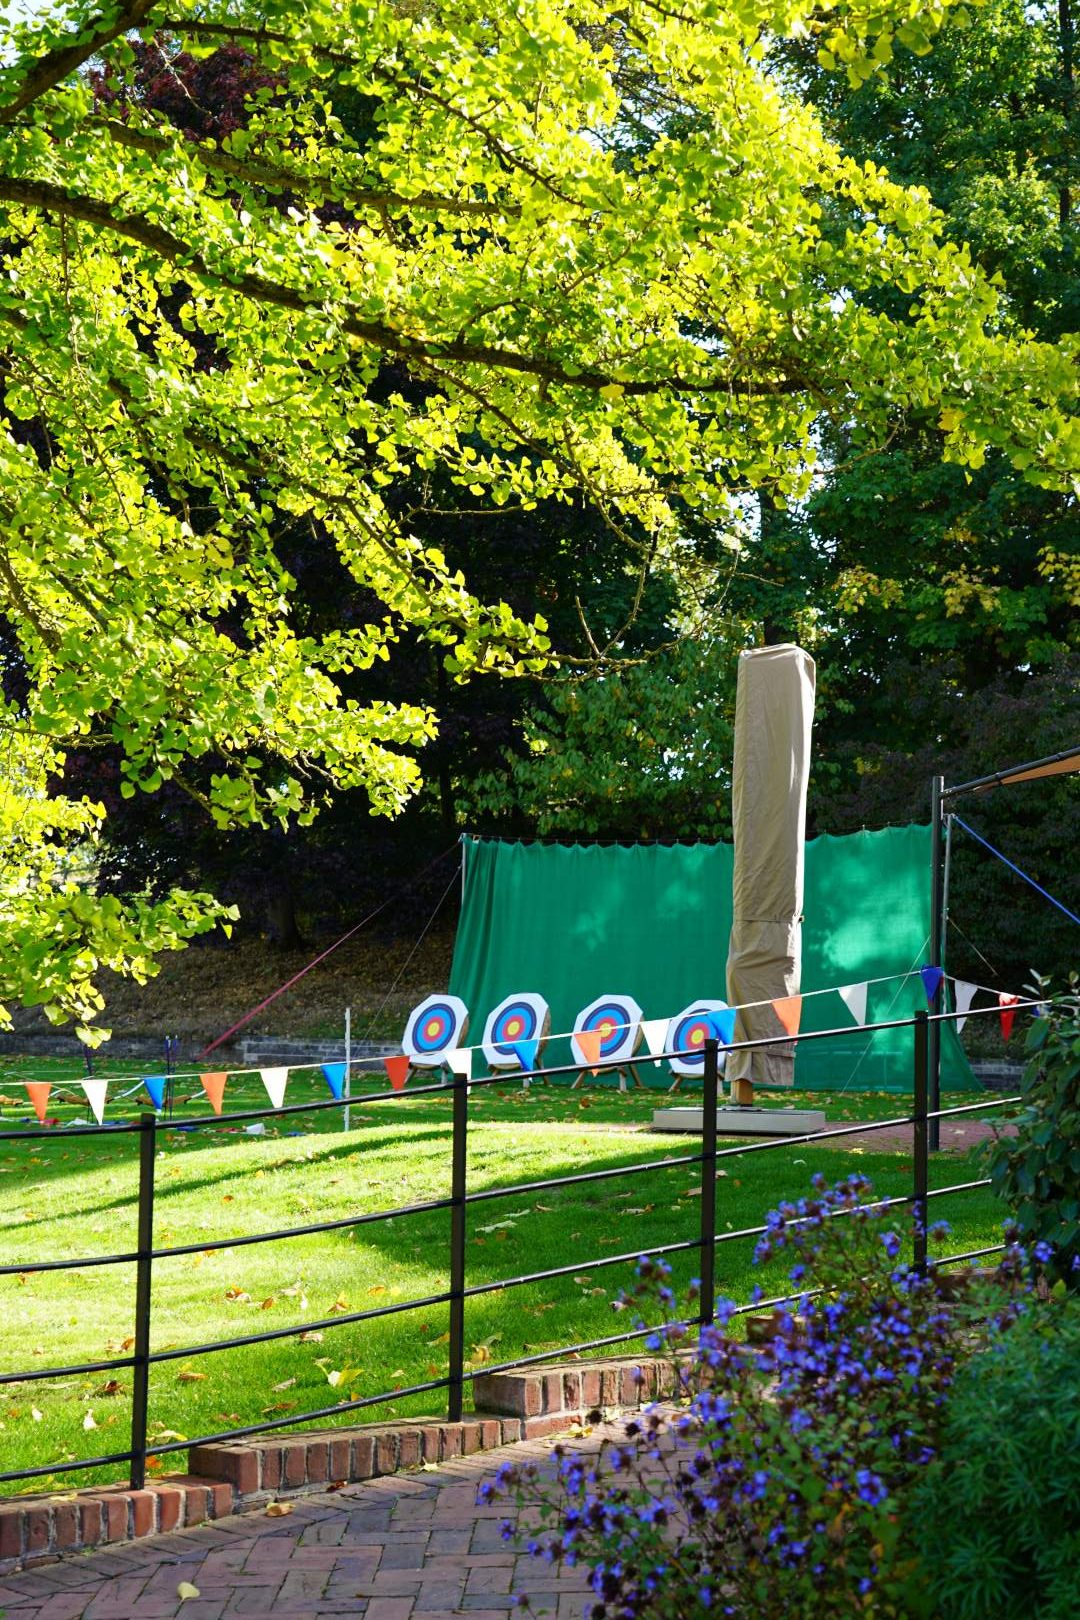 Archery on the lawn